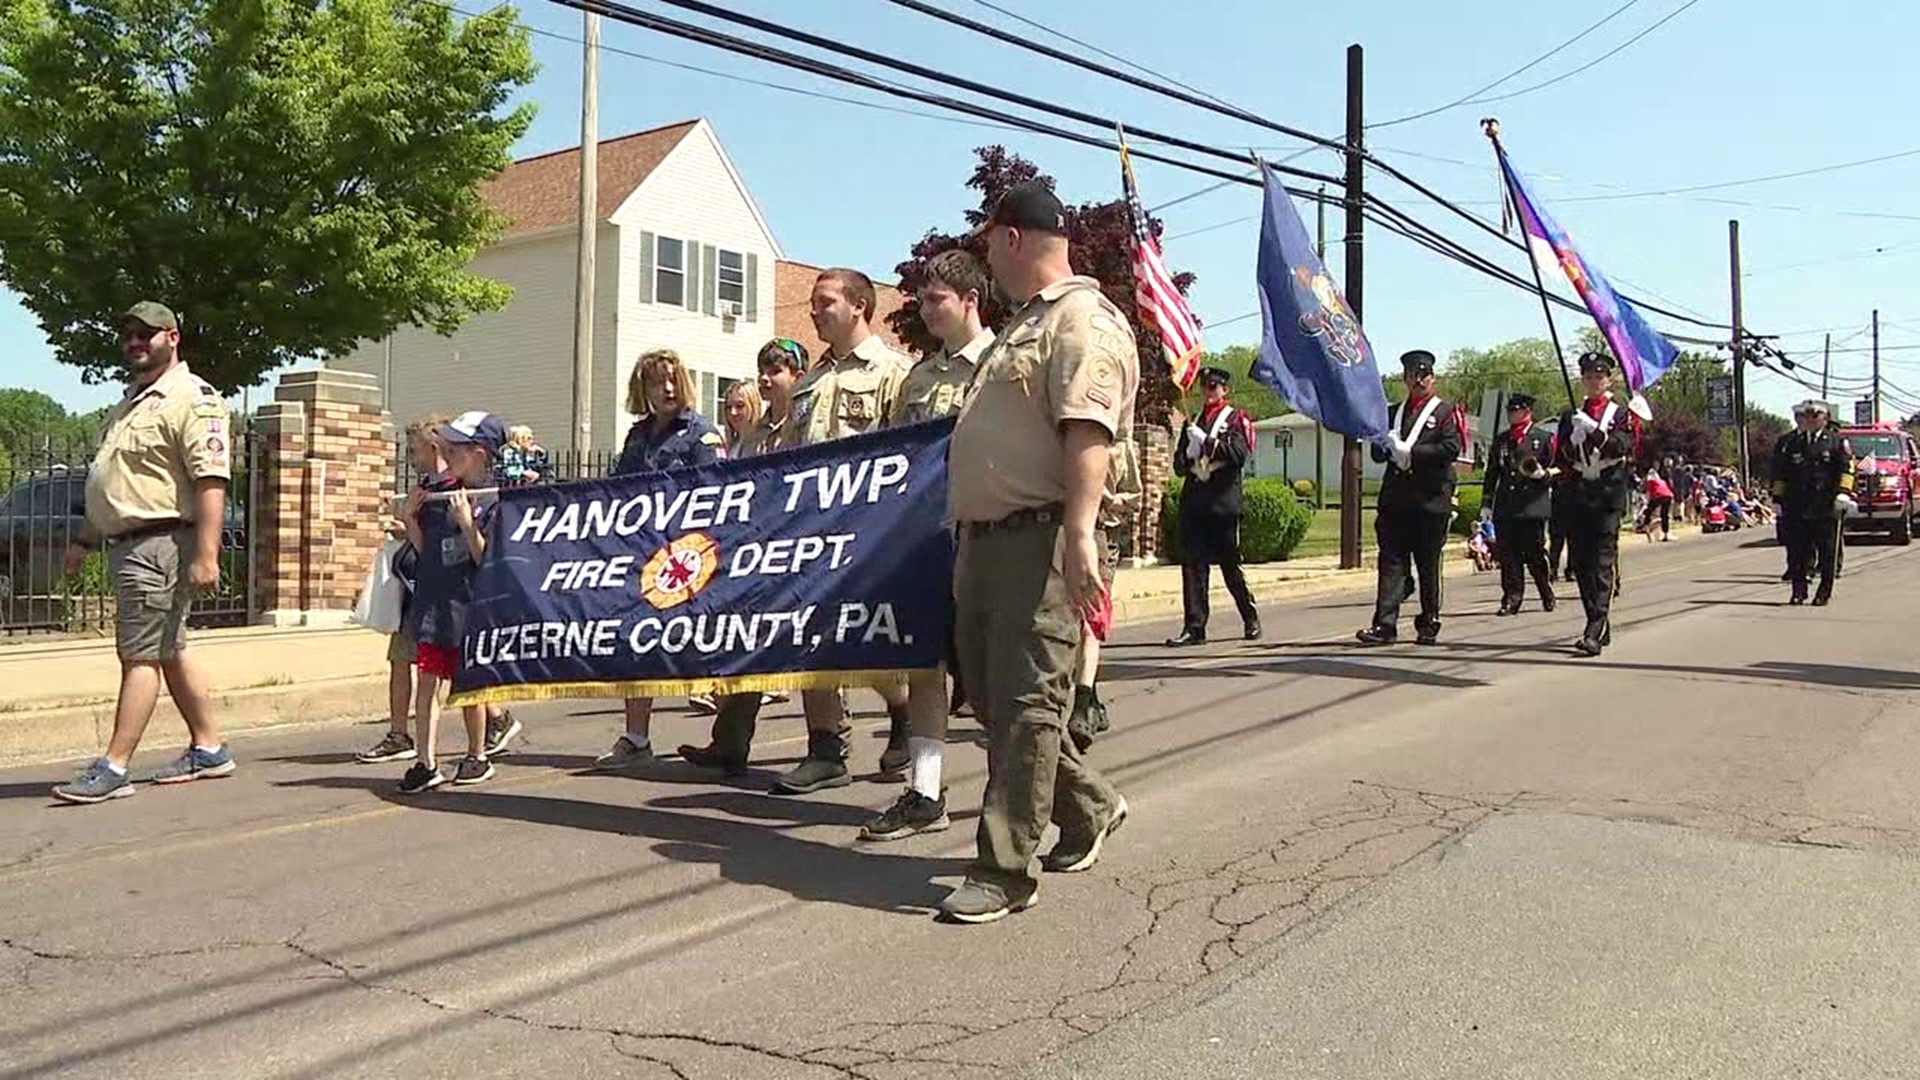 The annual parade was packed with people honoring those who served and sacrificed.